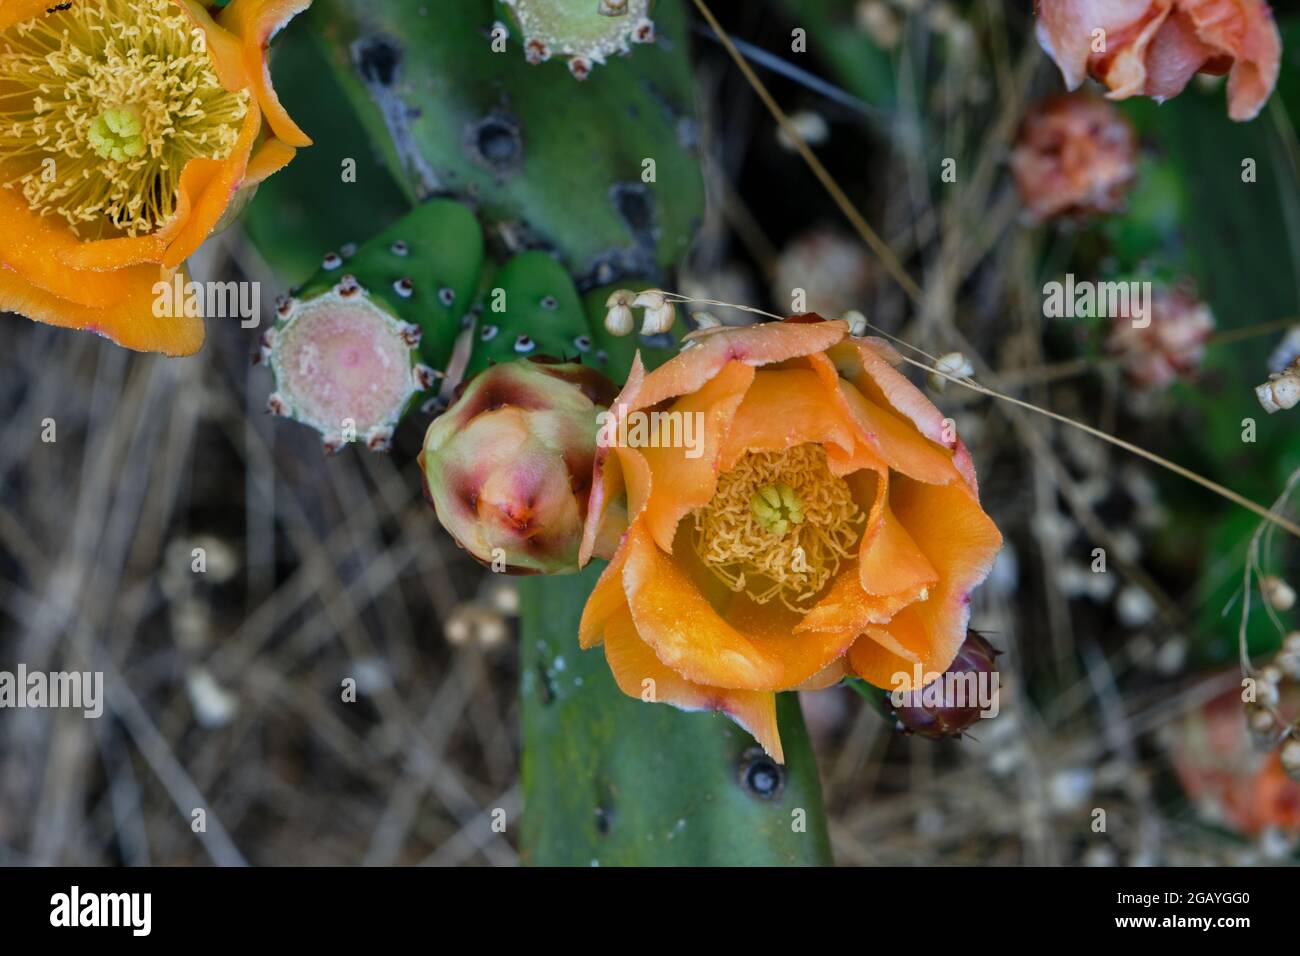 Detail of opuntia ficus indica or prickly pear with blossoming orange flowers Stock Photo